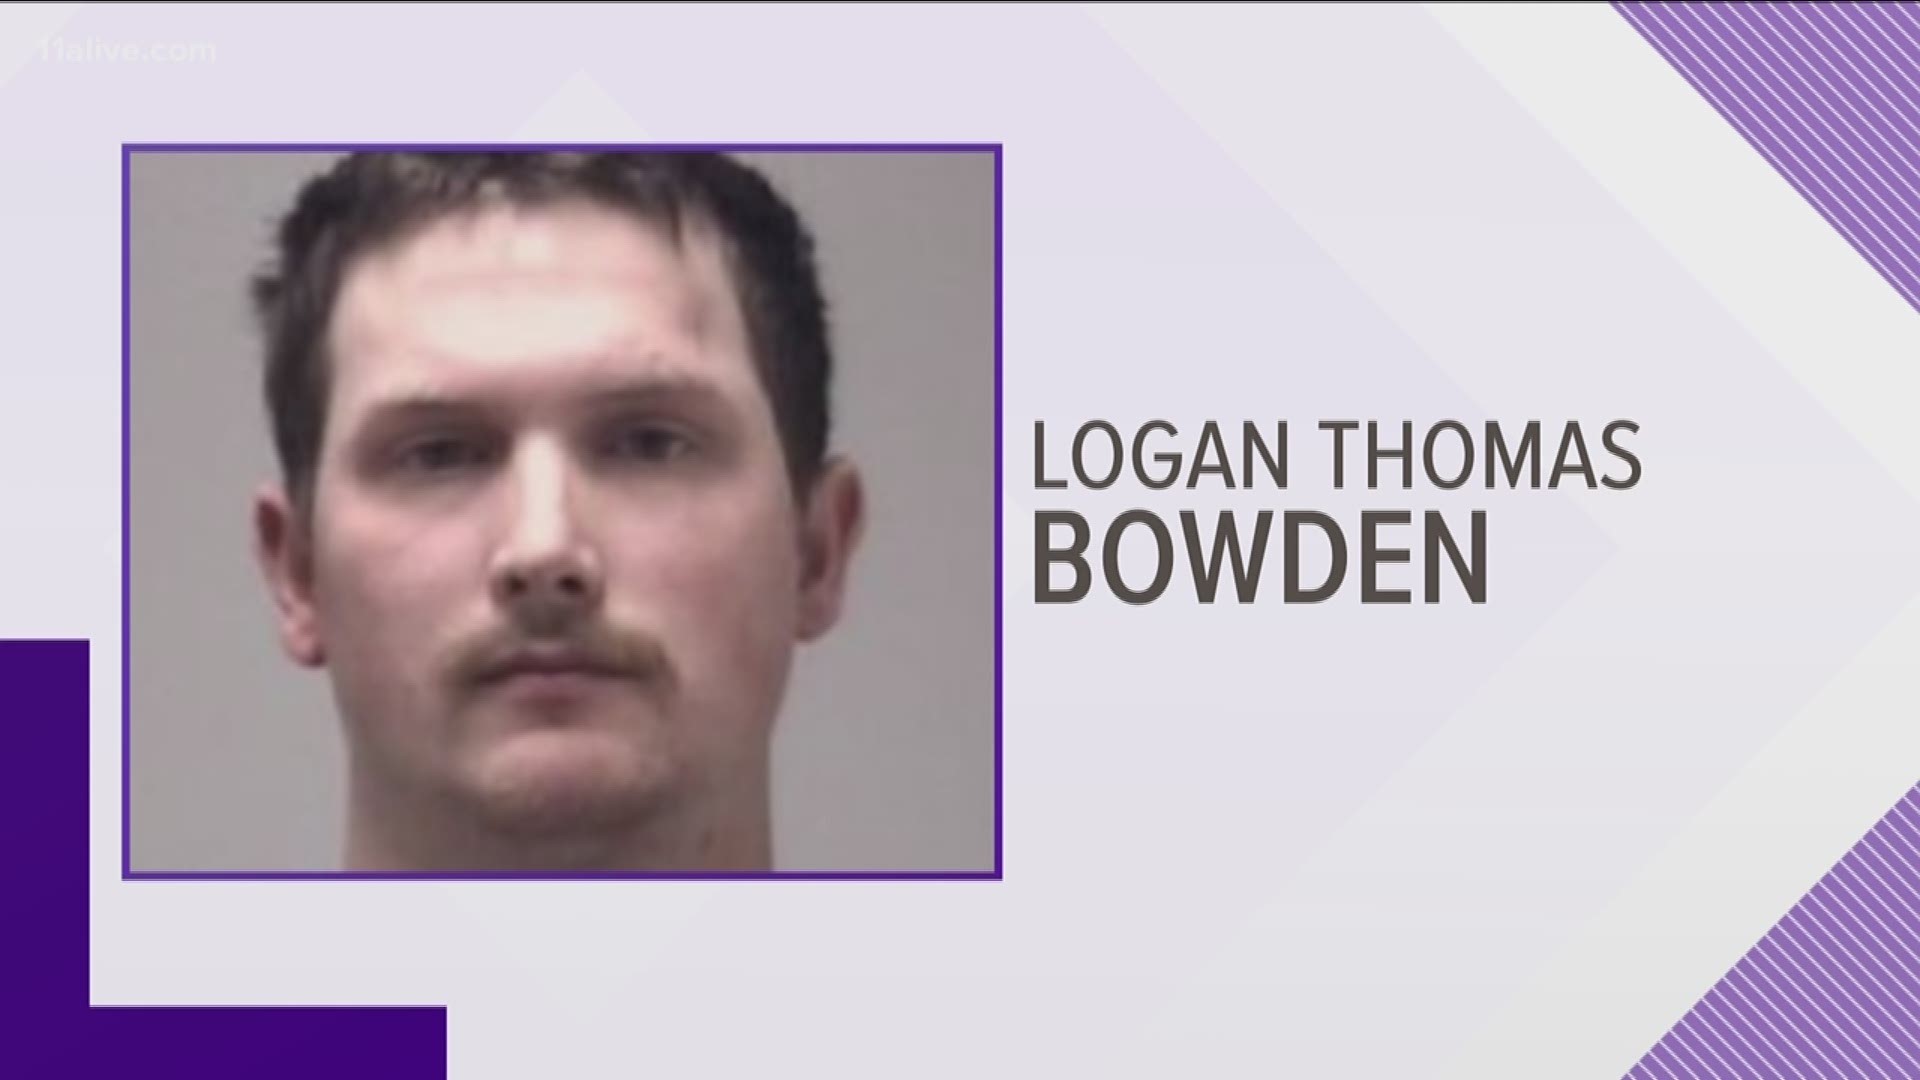 Logan Thomas Bowden was arrested for allegedly taking the silencer off of a rifle that was in the room above a garage.